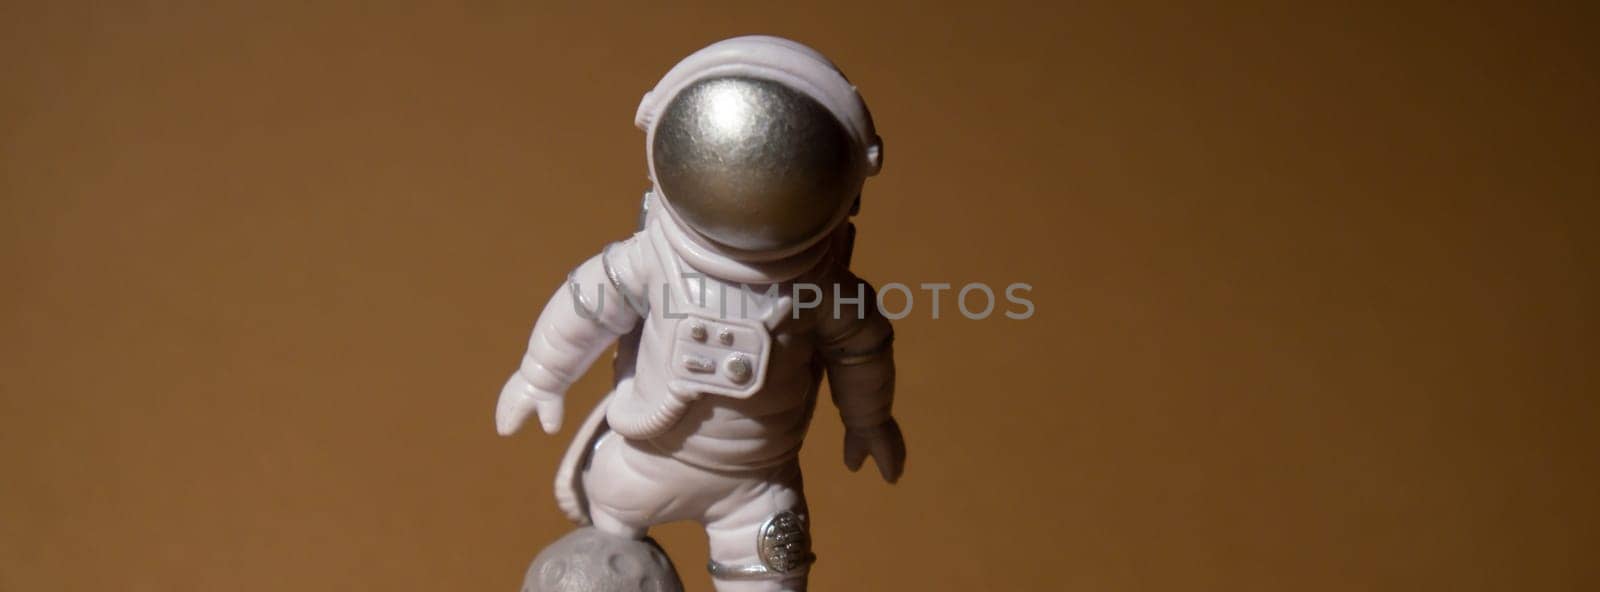 Plastic toy figure astronaut on beige neutral background Copy space. Concept of out of earth travel, private spaceman commercial flights. Space missions and Sustainability